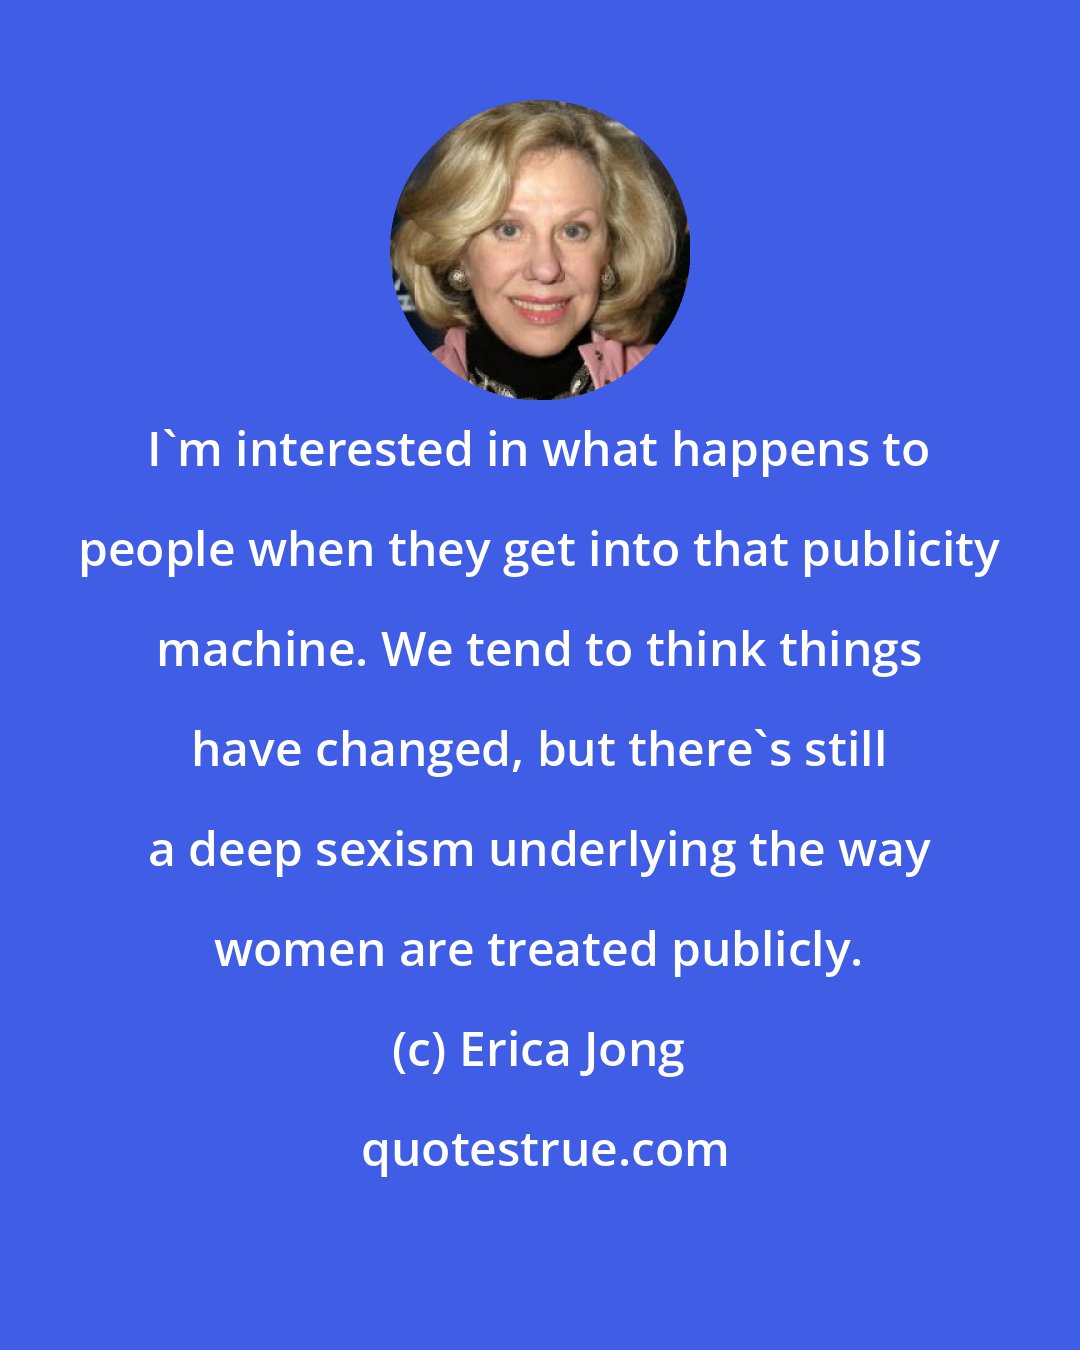 Erica Jong: I'm interested in what happens to people when they get into that publicity machine. We tend to think things have changed, but there's still a deep sexism underlying the way women are treated publicly.